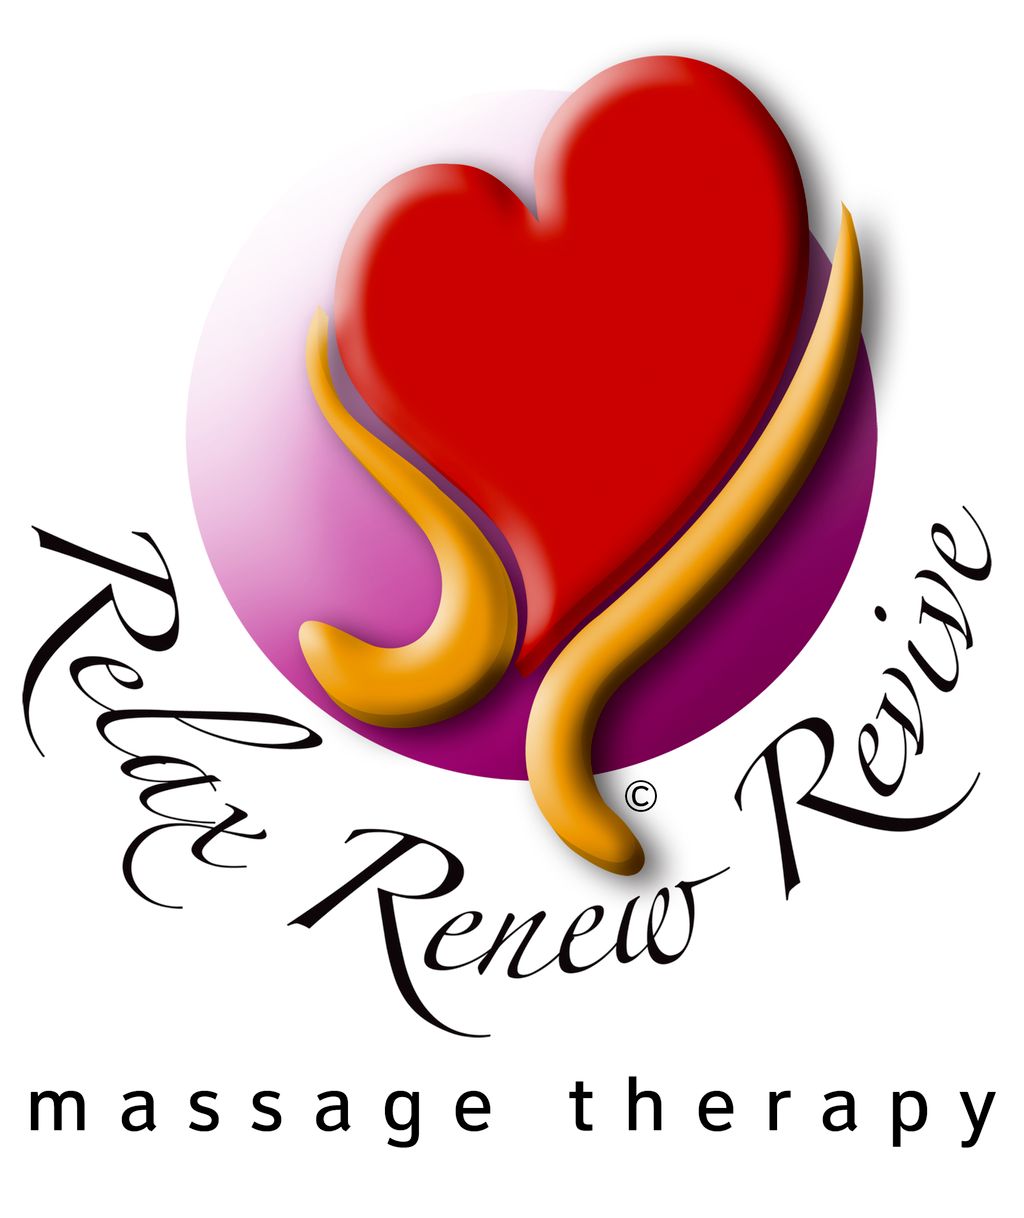 Relax Renew Revive Massage Therapy